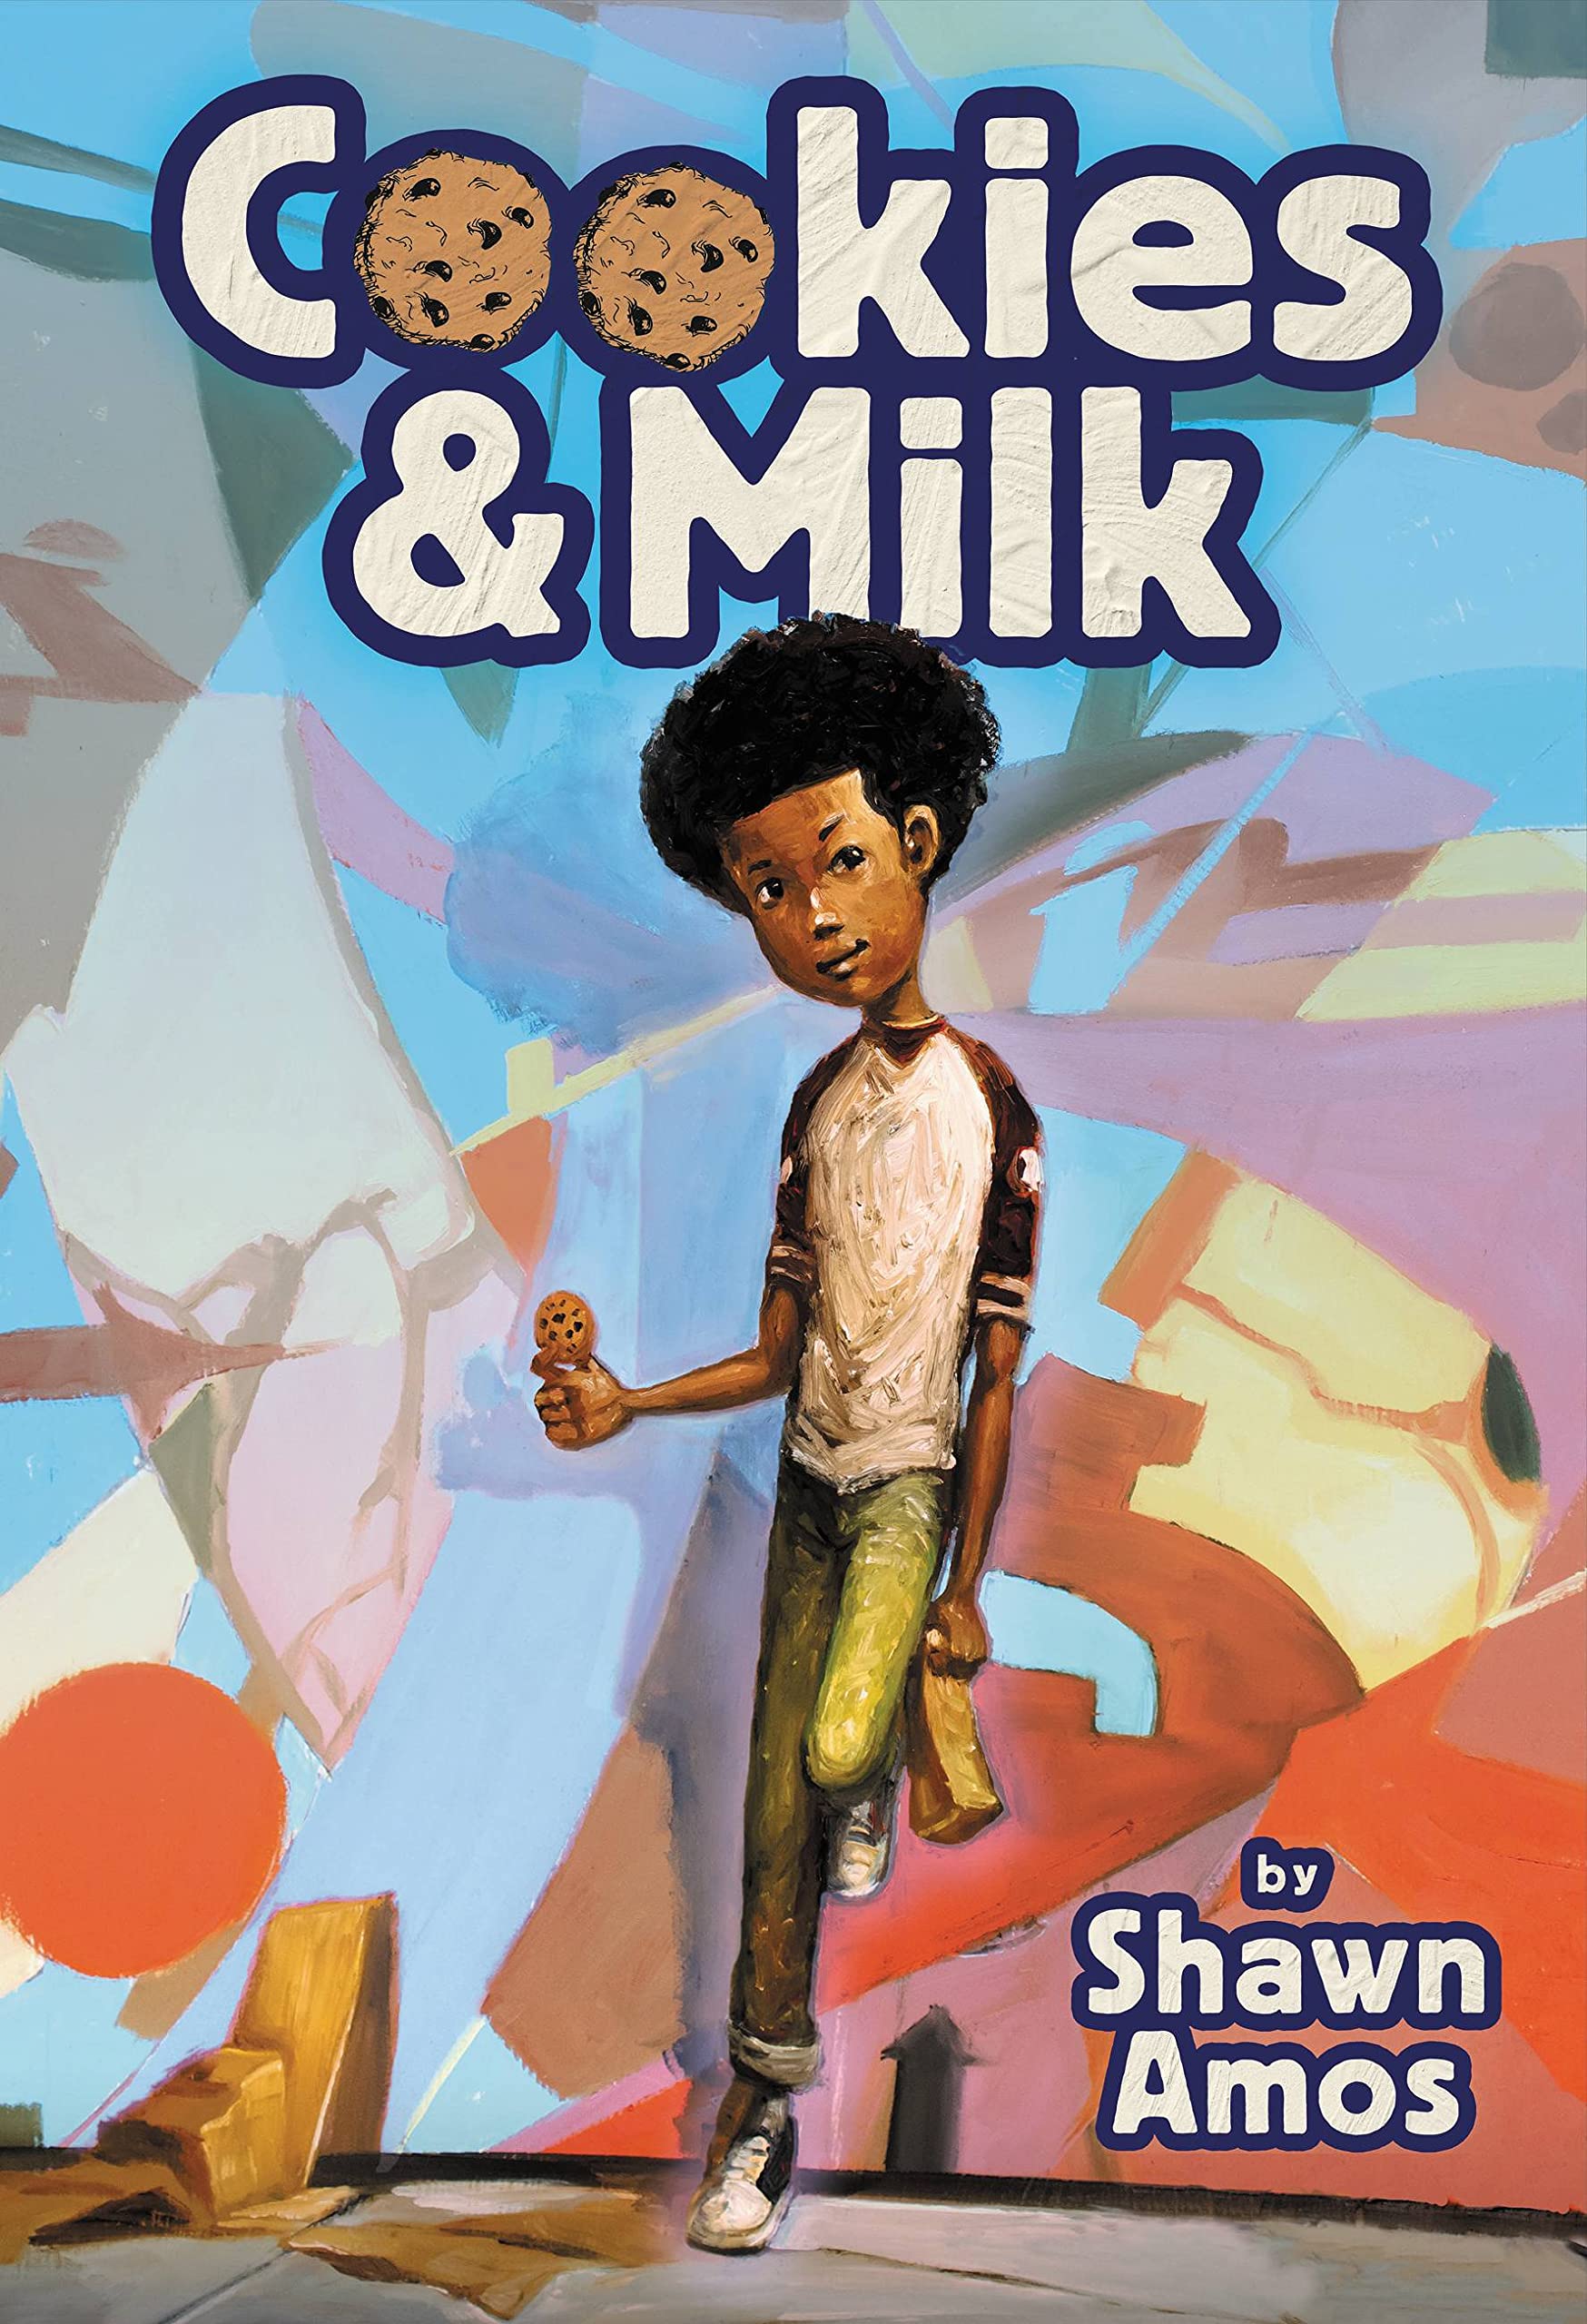 Image for "Cookies and Milk"